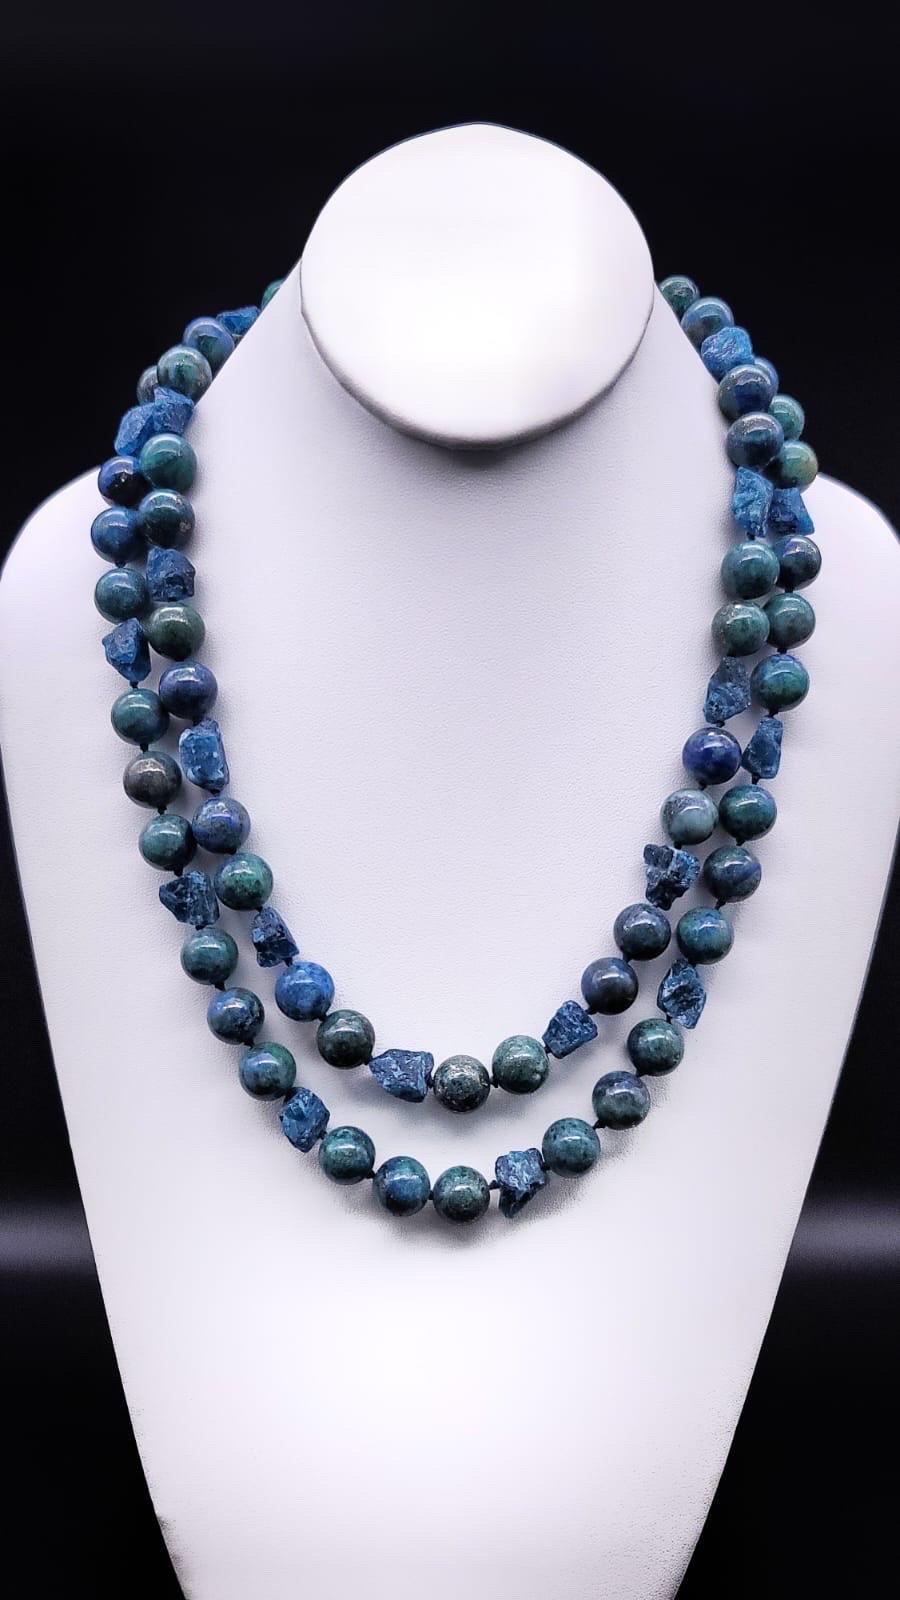 A.Jeschel Captivating Chrysocolla and Apatite necklace For Sale 3